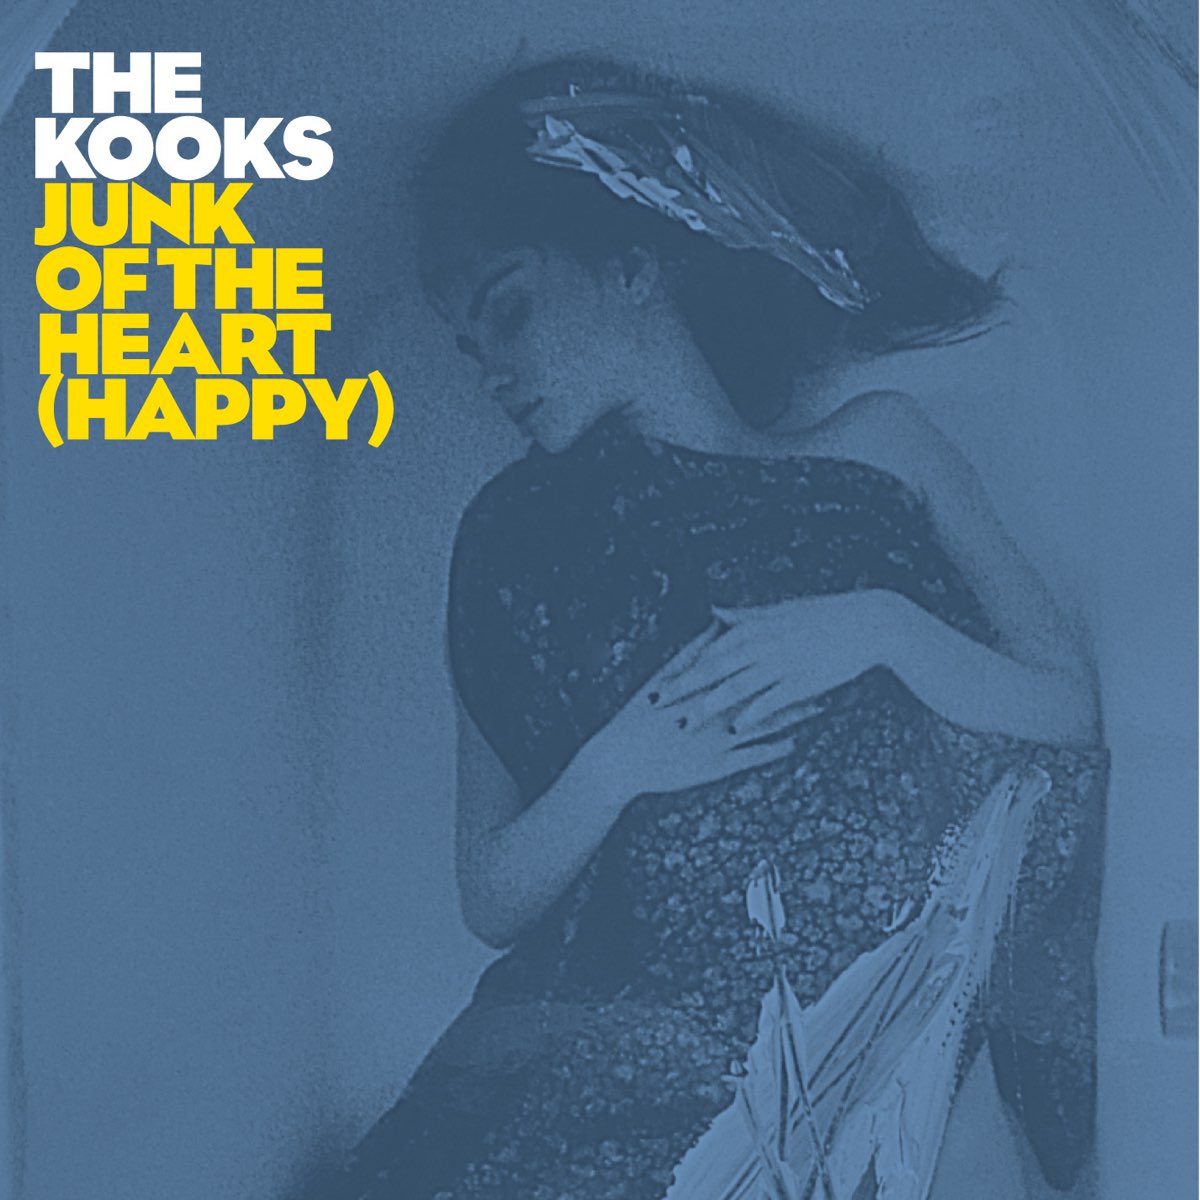 The Kooks Junk of the Heart (Happy) cover artwork